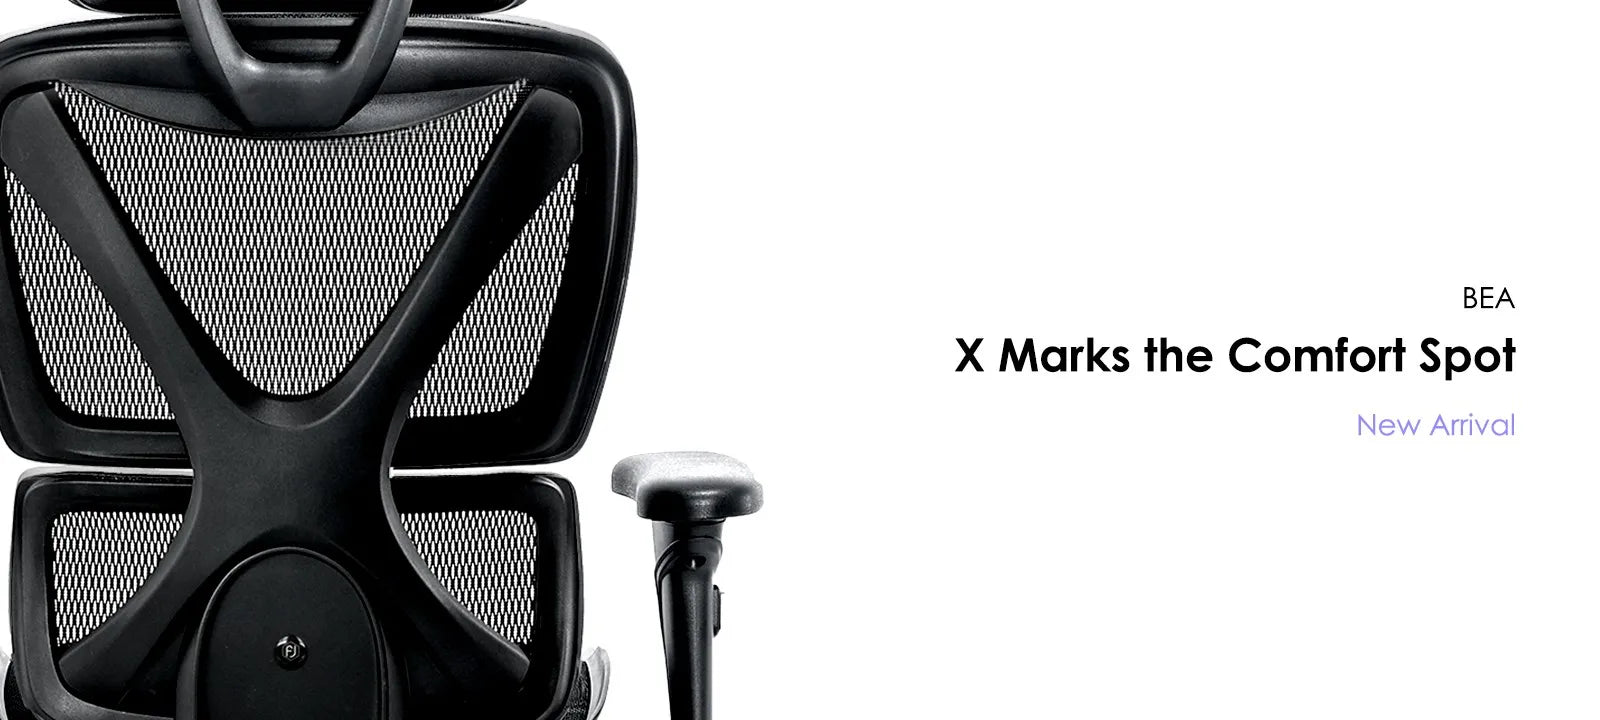 Ergonomic office chair with X-shaped backrest design, promoting 'X Marks the Comfort Spot' by BEA.